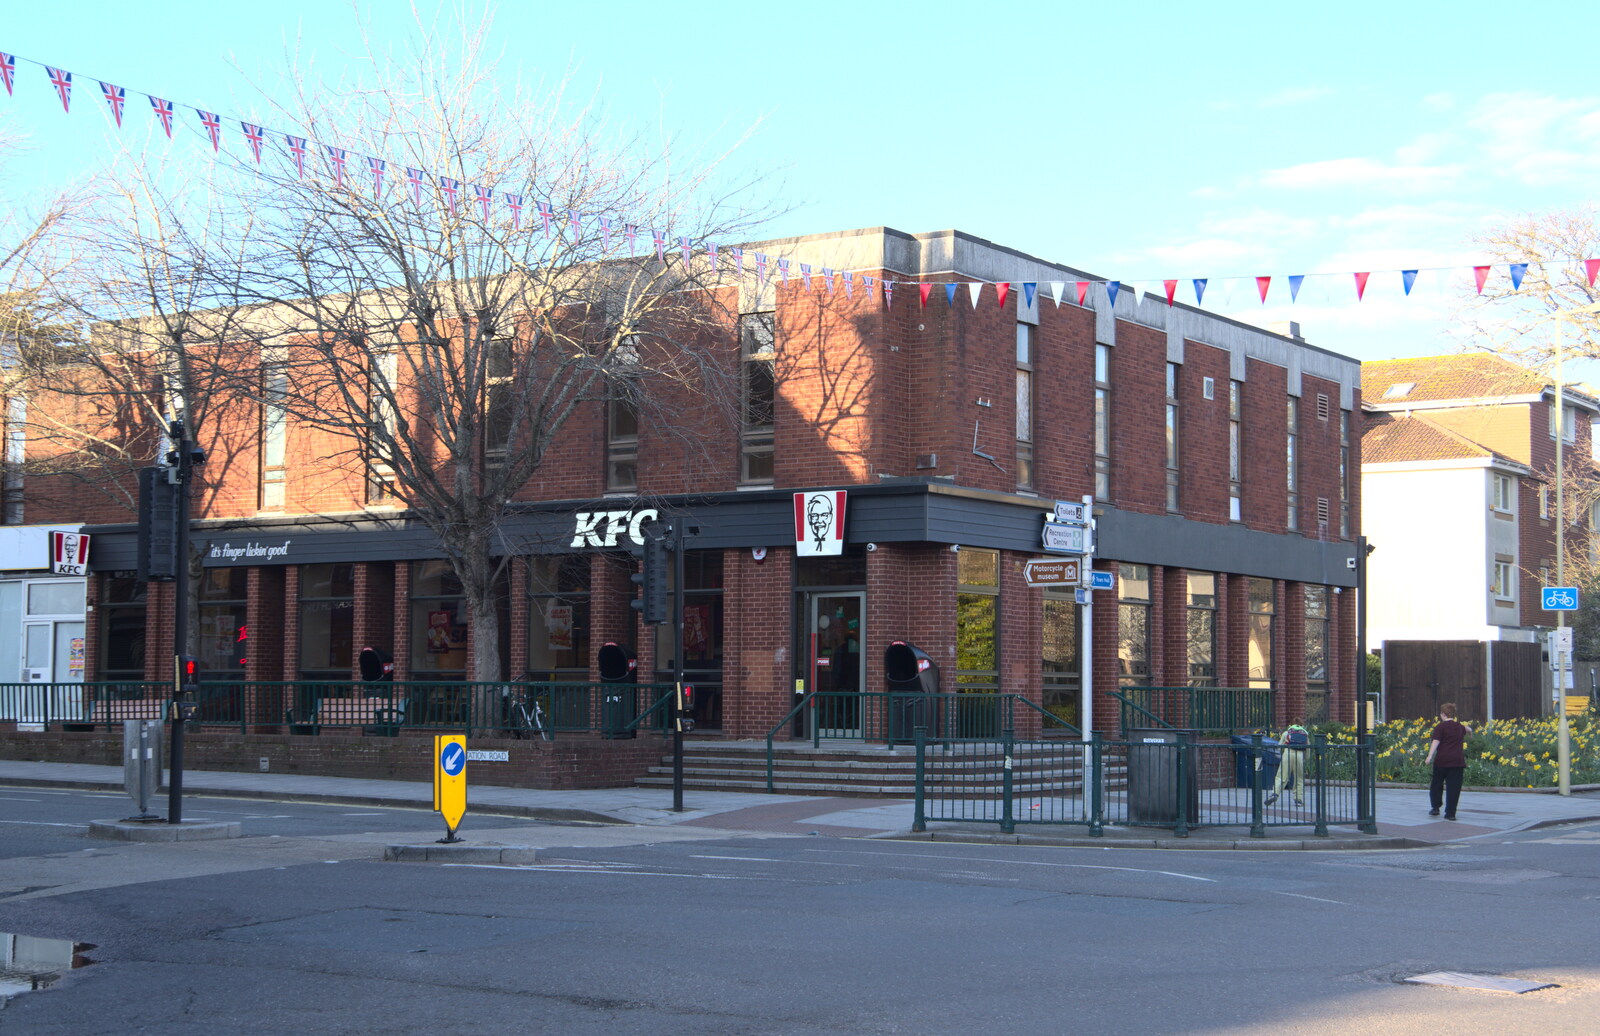 The old NatWest bank is now a KFC from A Day in New Milton, Hampshire - 3rd April 2023